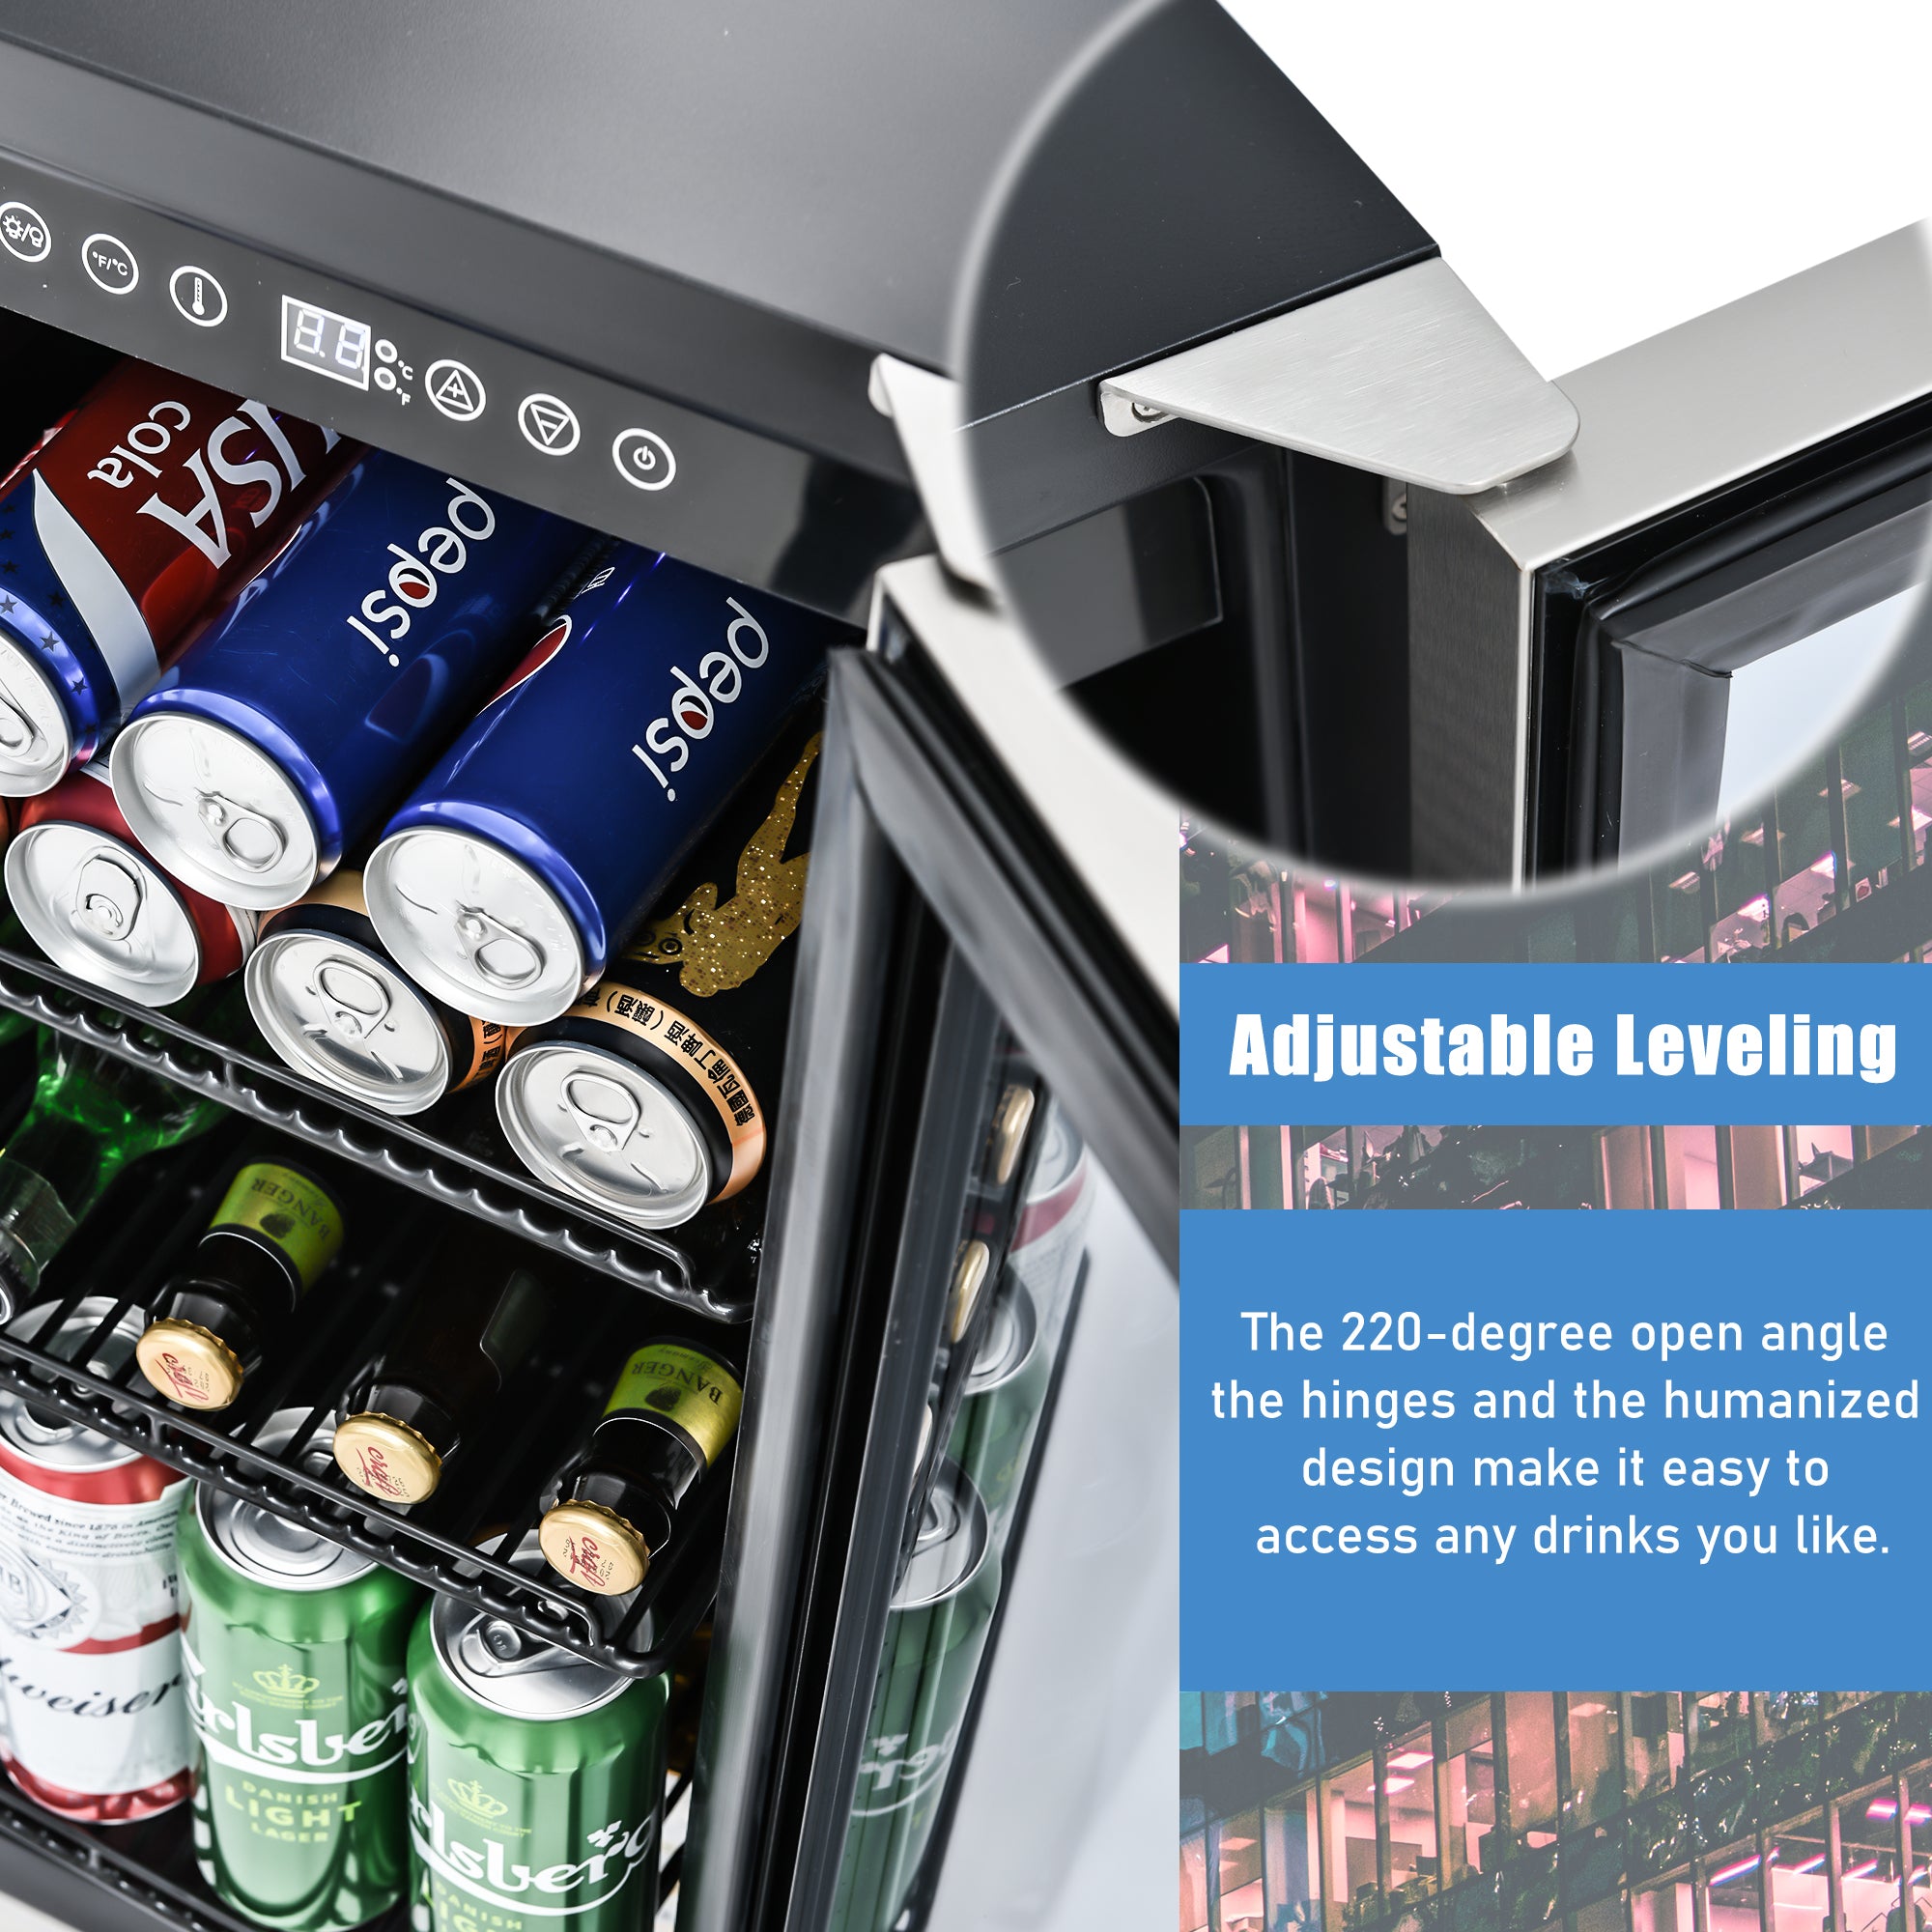 Built-in and Freestanding 15" Mini Beverage Refrigerator